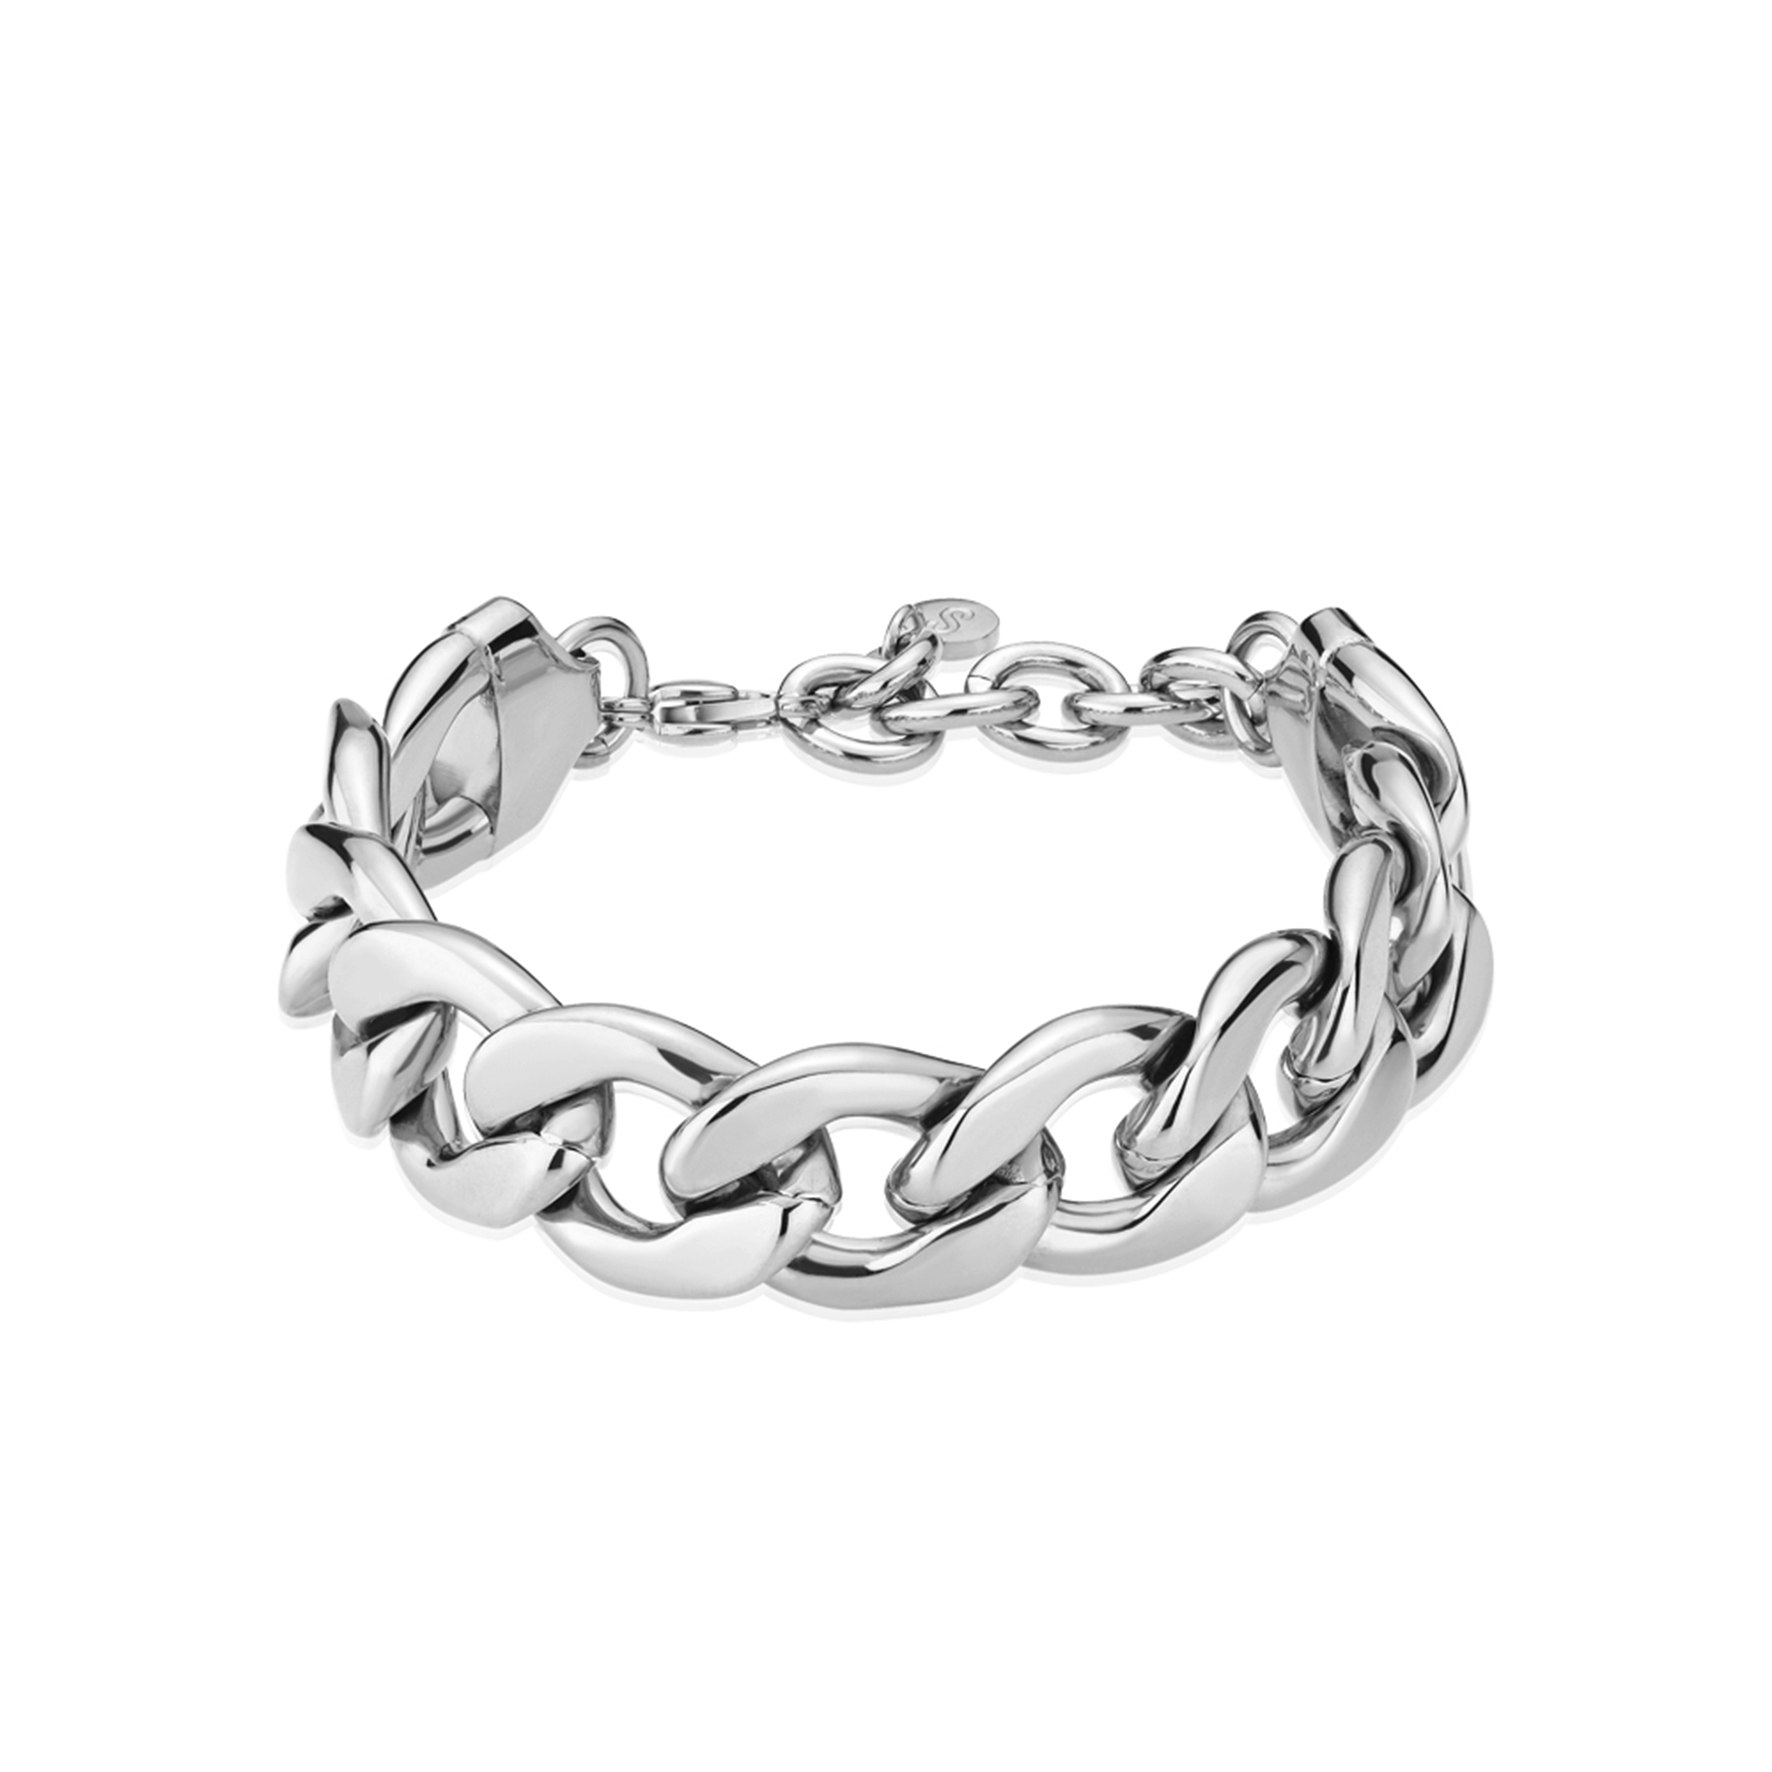 Panzer Chunky Bracelet from Sistie 2nd in Stainless steel